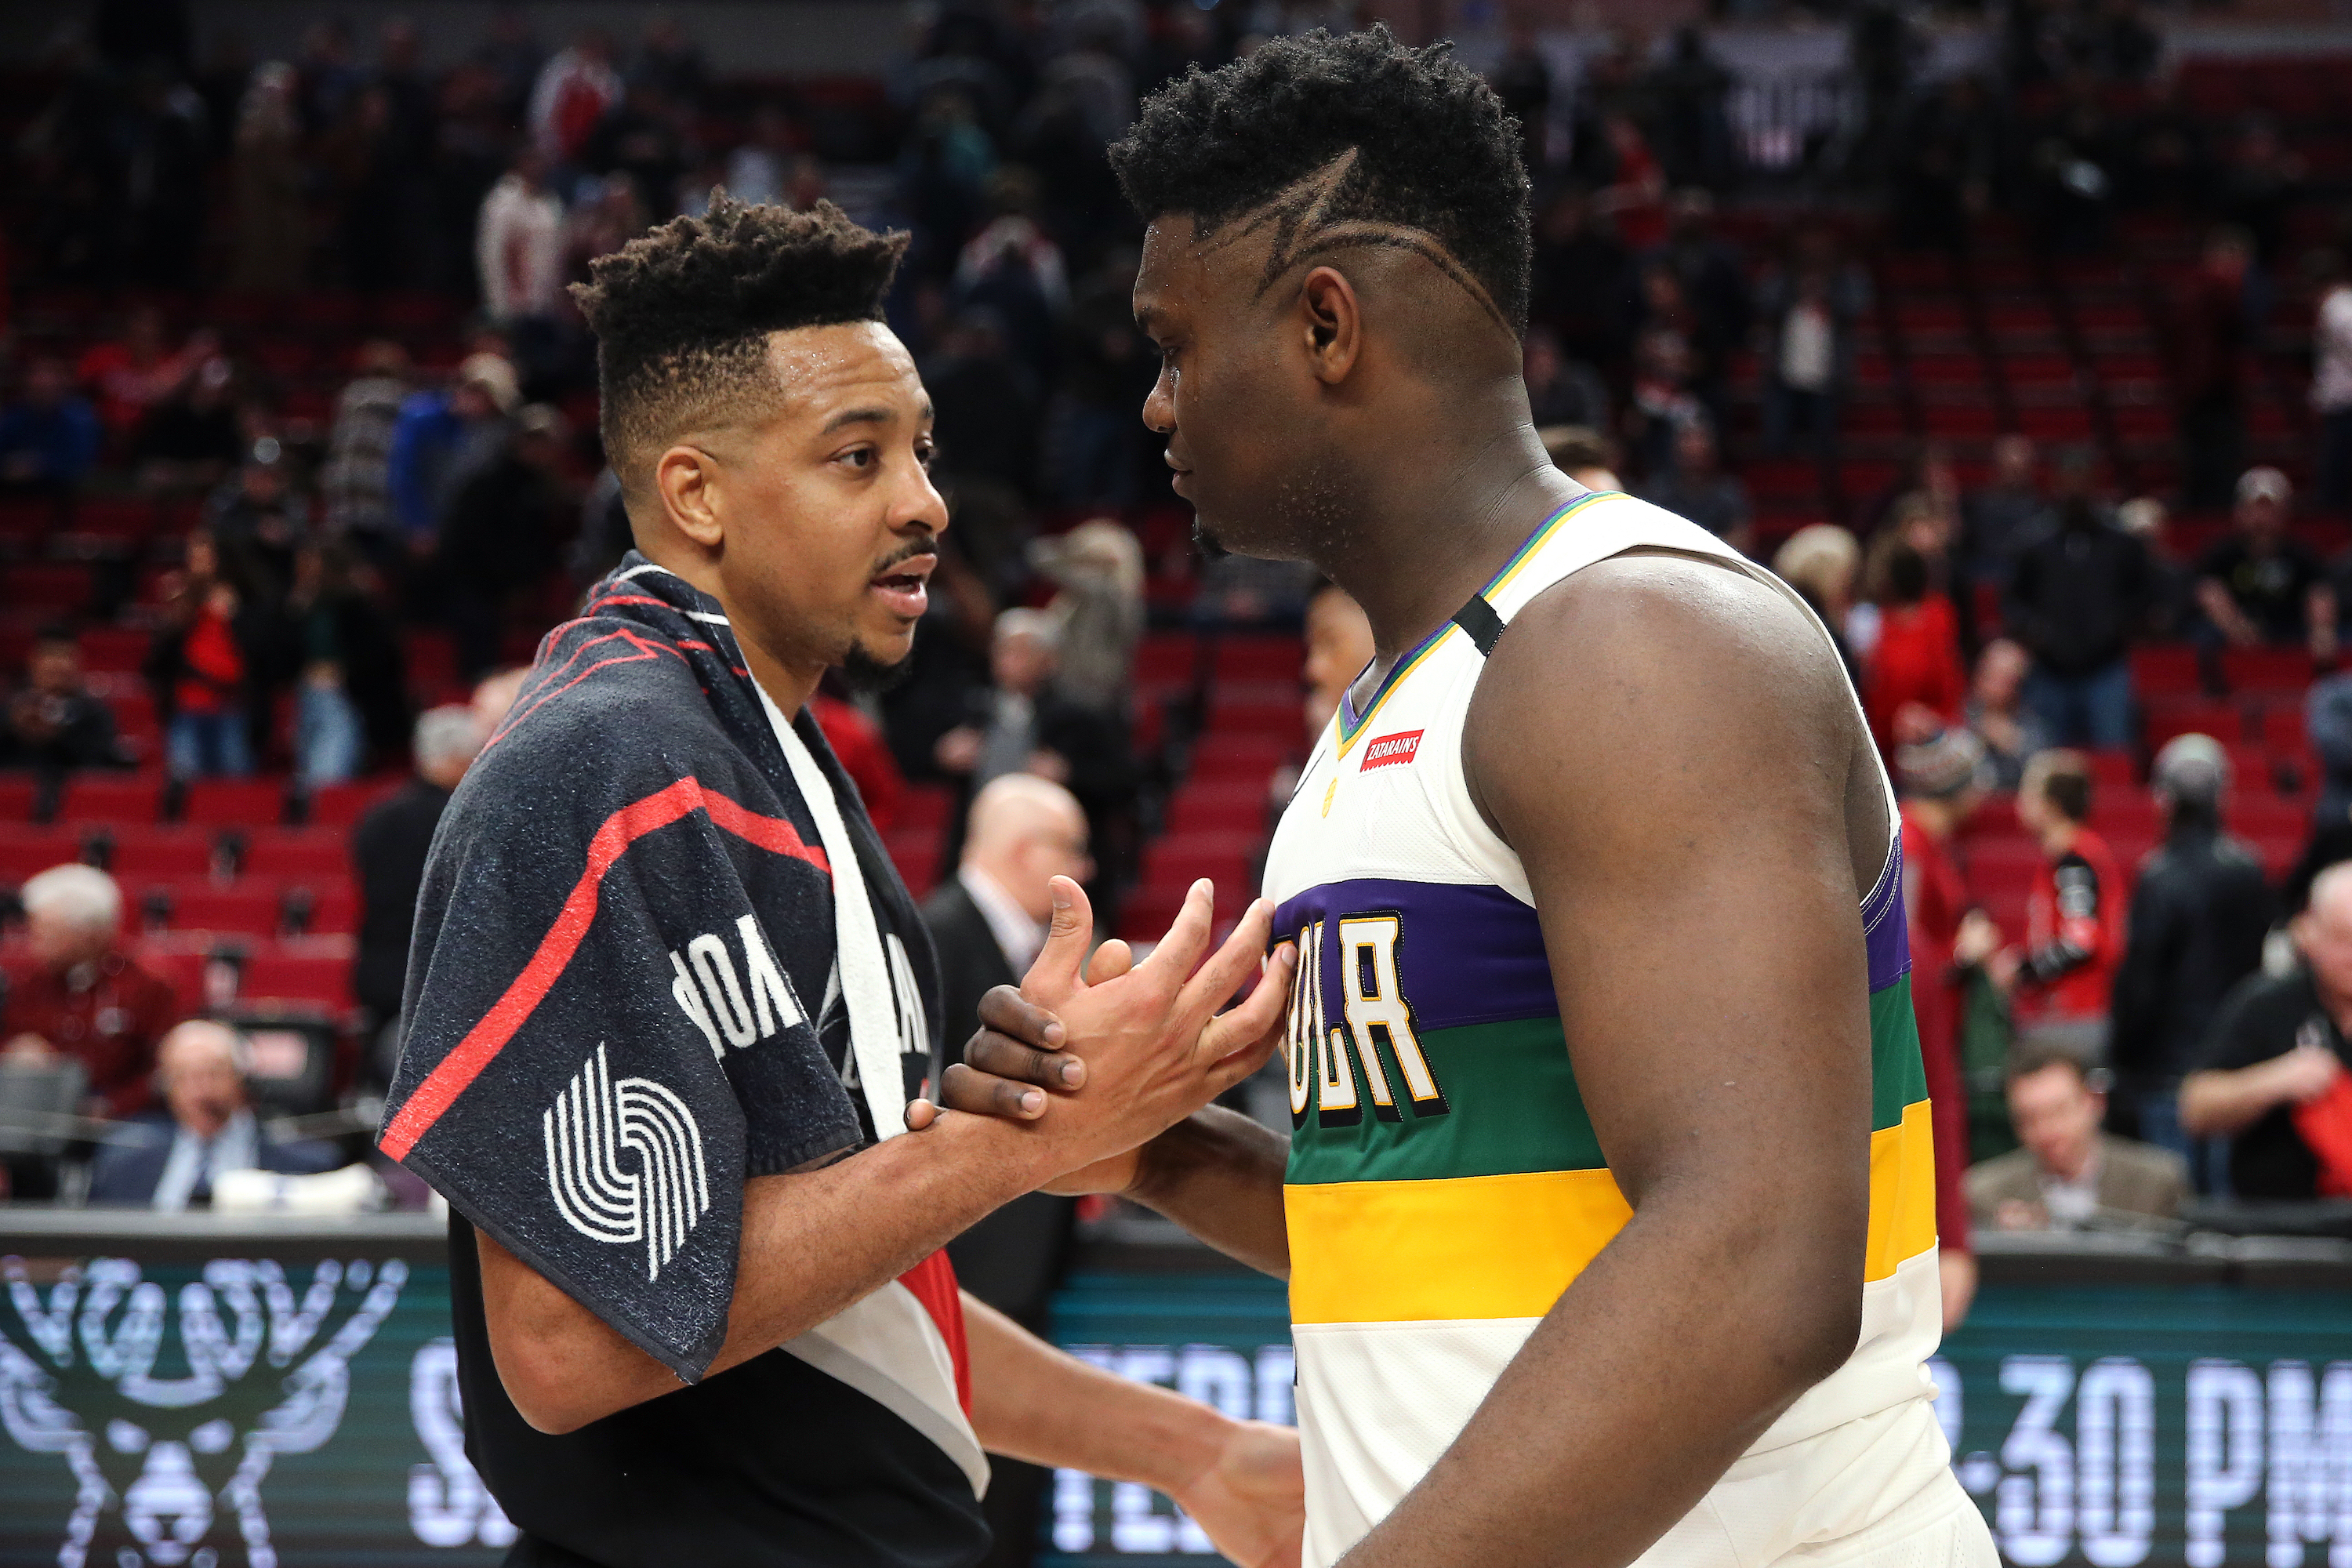 New Orleans Pelicans star Zion Williamson shakes hands with CJ McCollum during an NBA game in February 2020